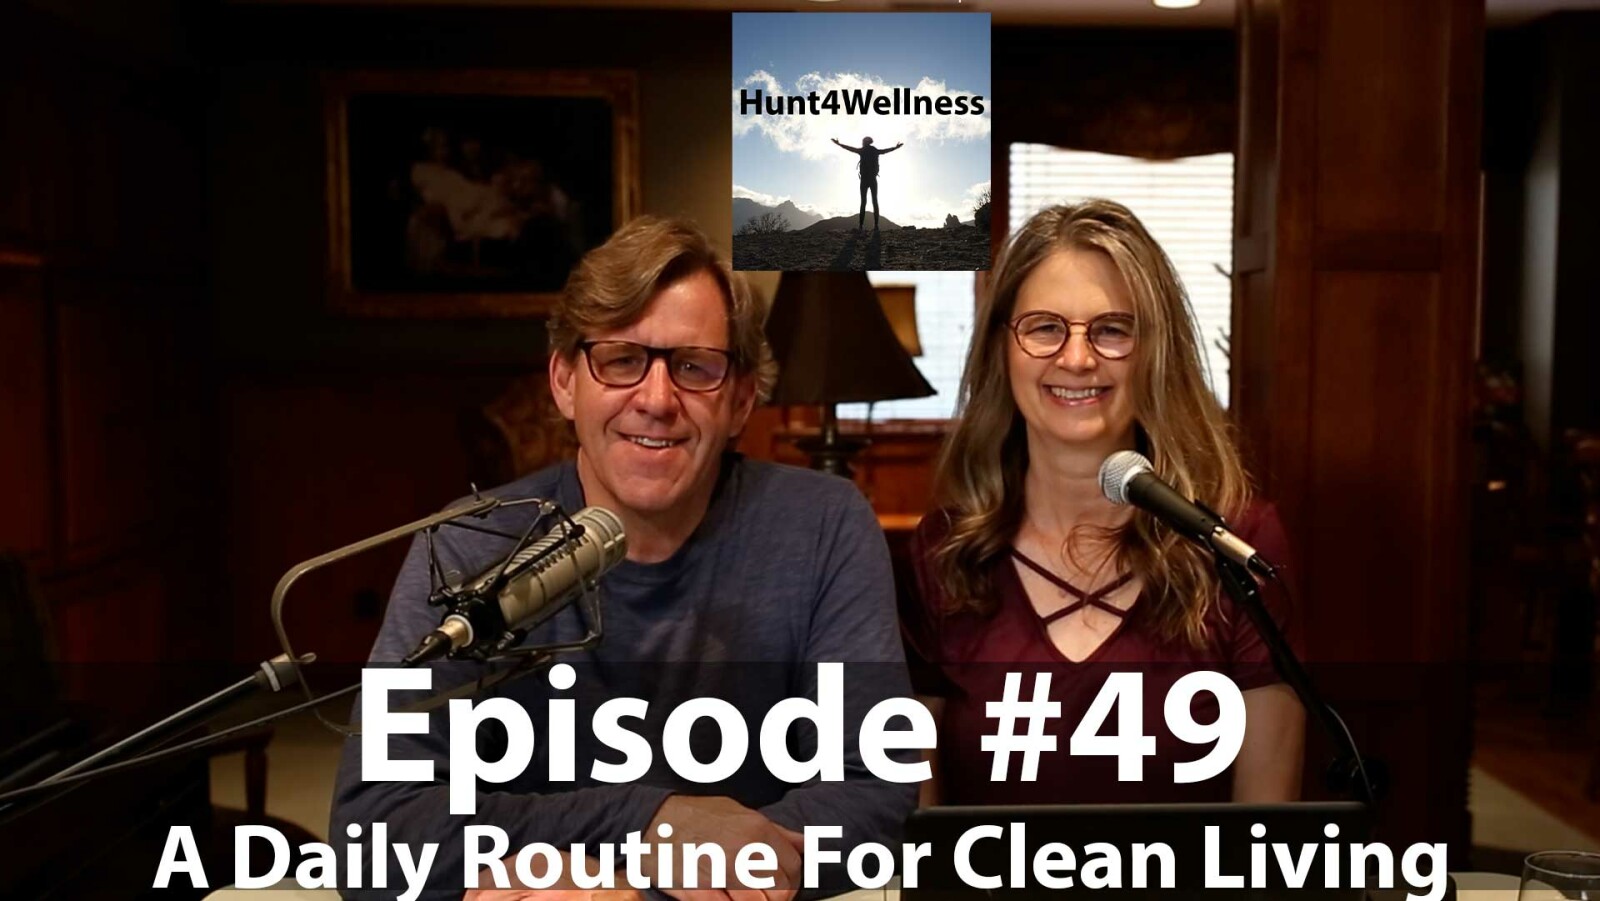 Episode #49 - A Daily Routine For Clean Living